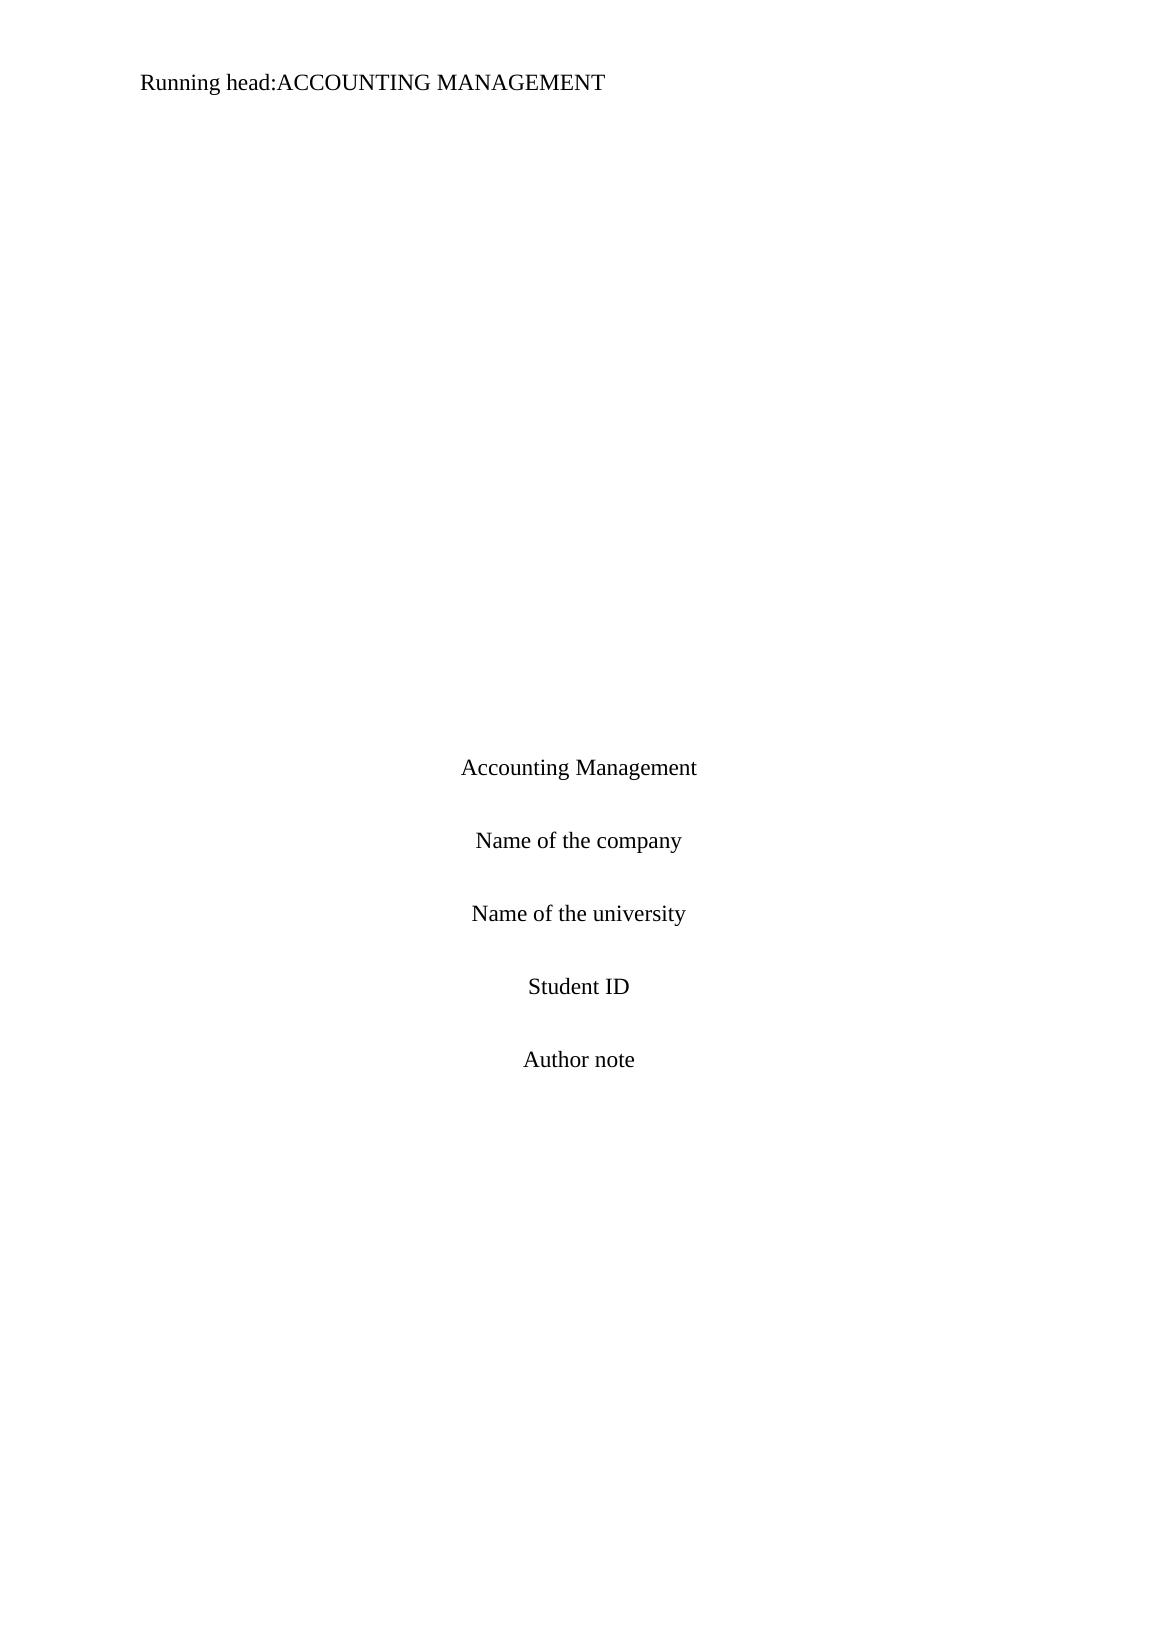 Accounting Management Assignment Sample_1